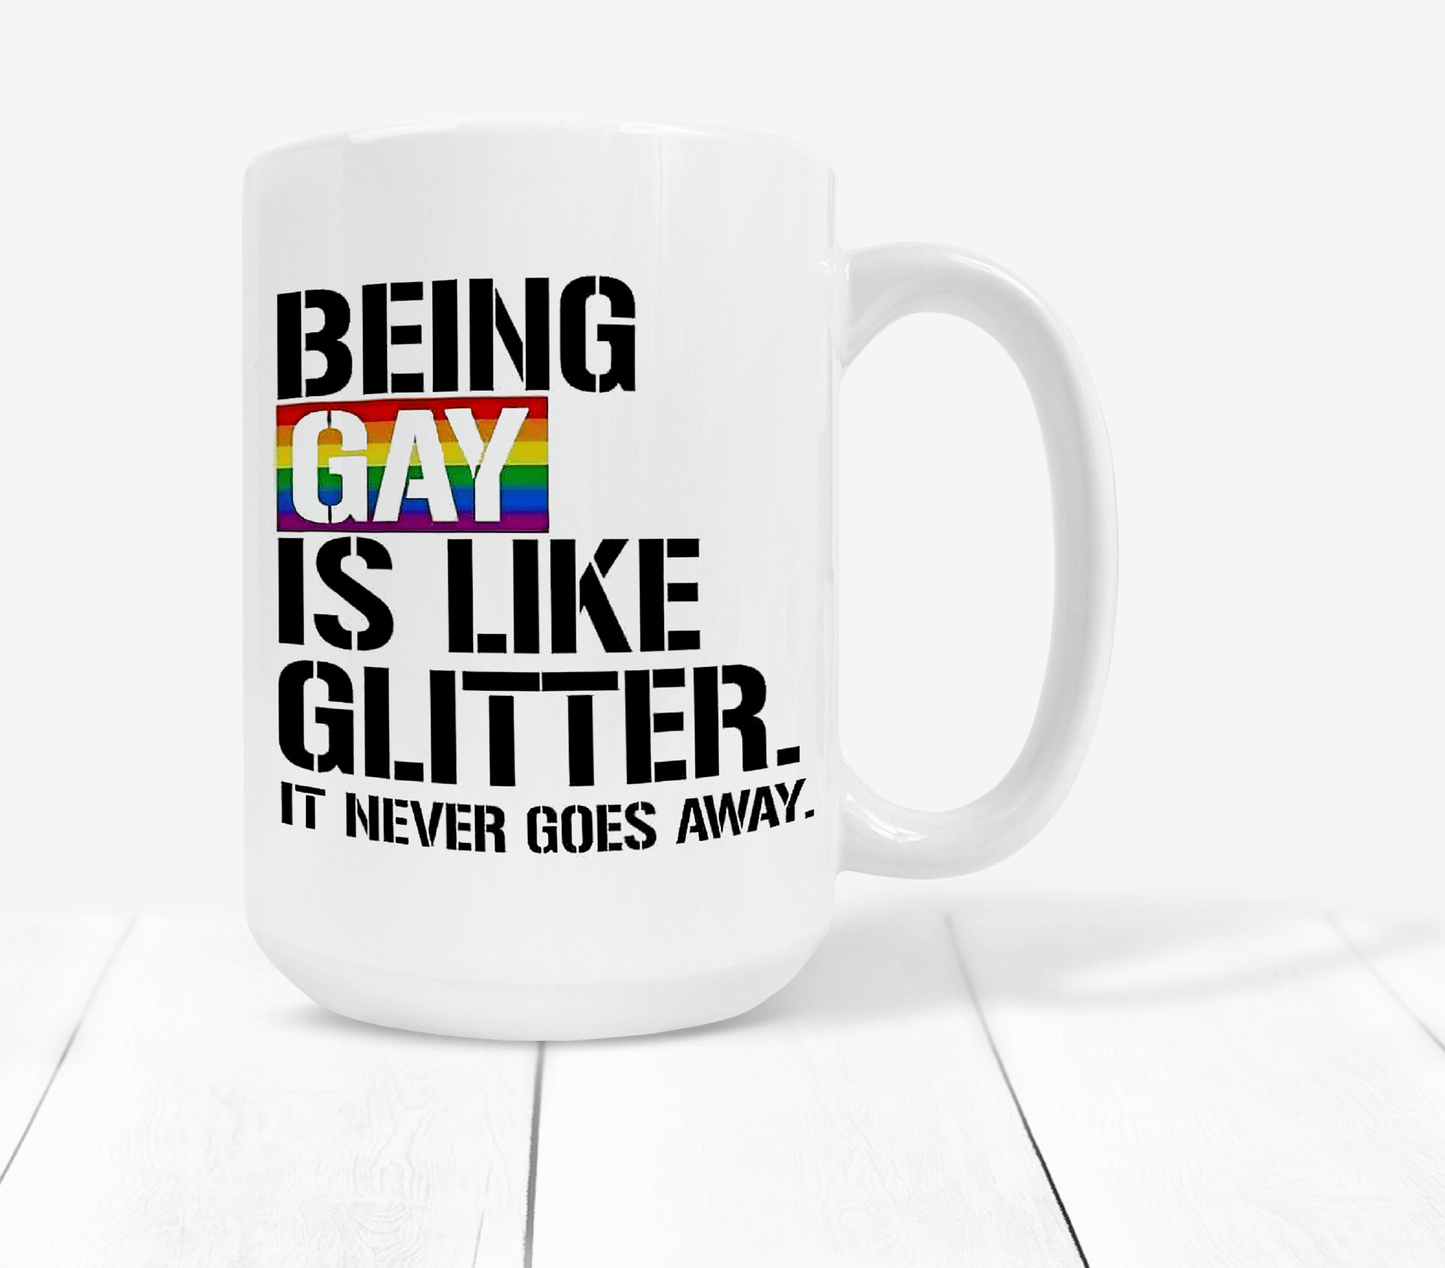  Being Gay is Like Glitter It Never Goes Away Coffee Mug by Free Spirit Accessories sold by Free Spirit Accessories